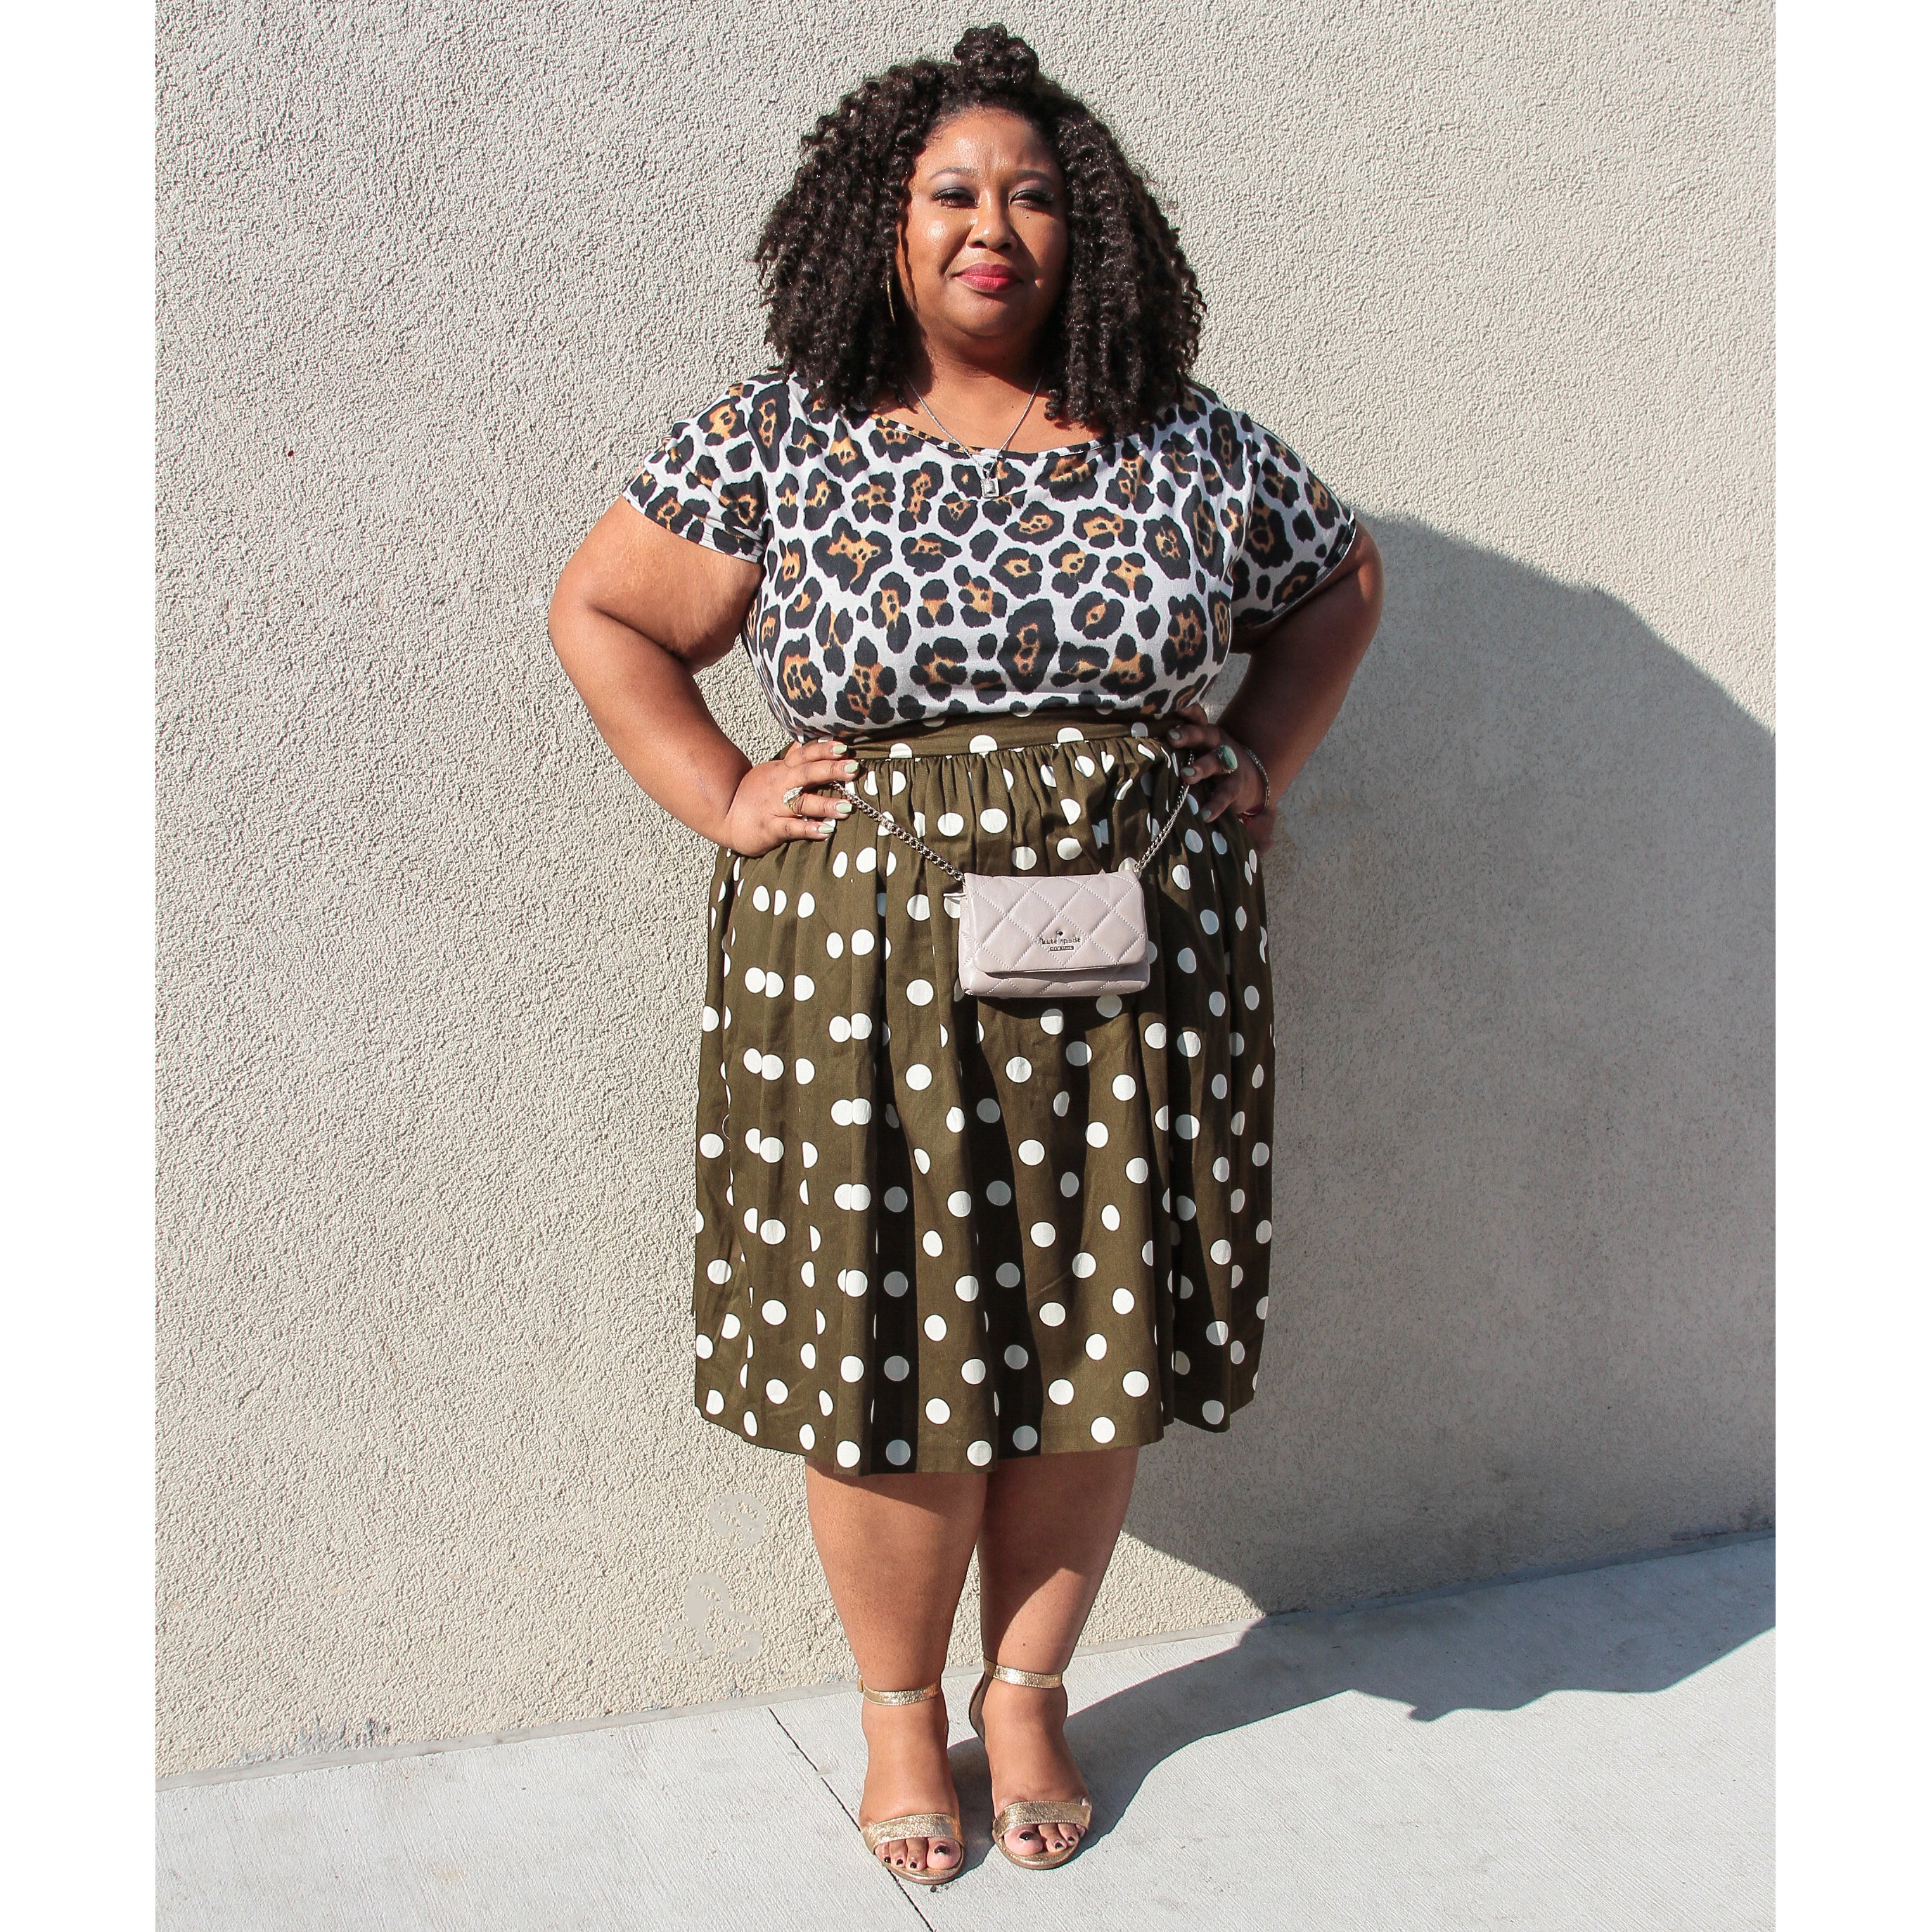 Curvy Girl Style at TheCurvyCon 2016
